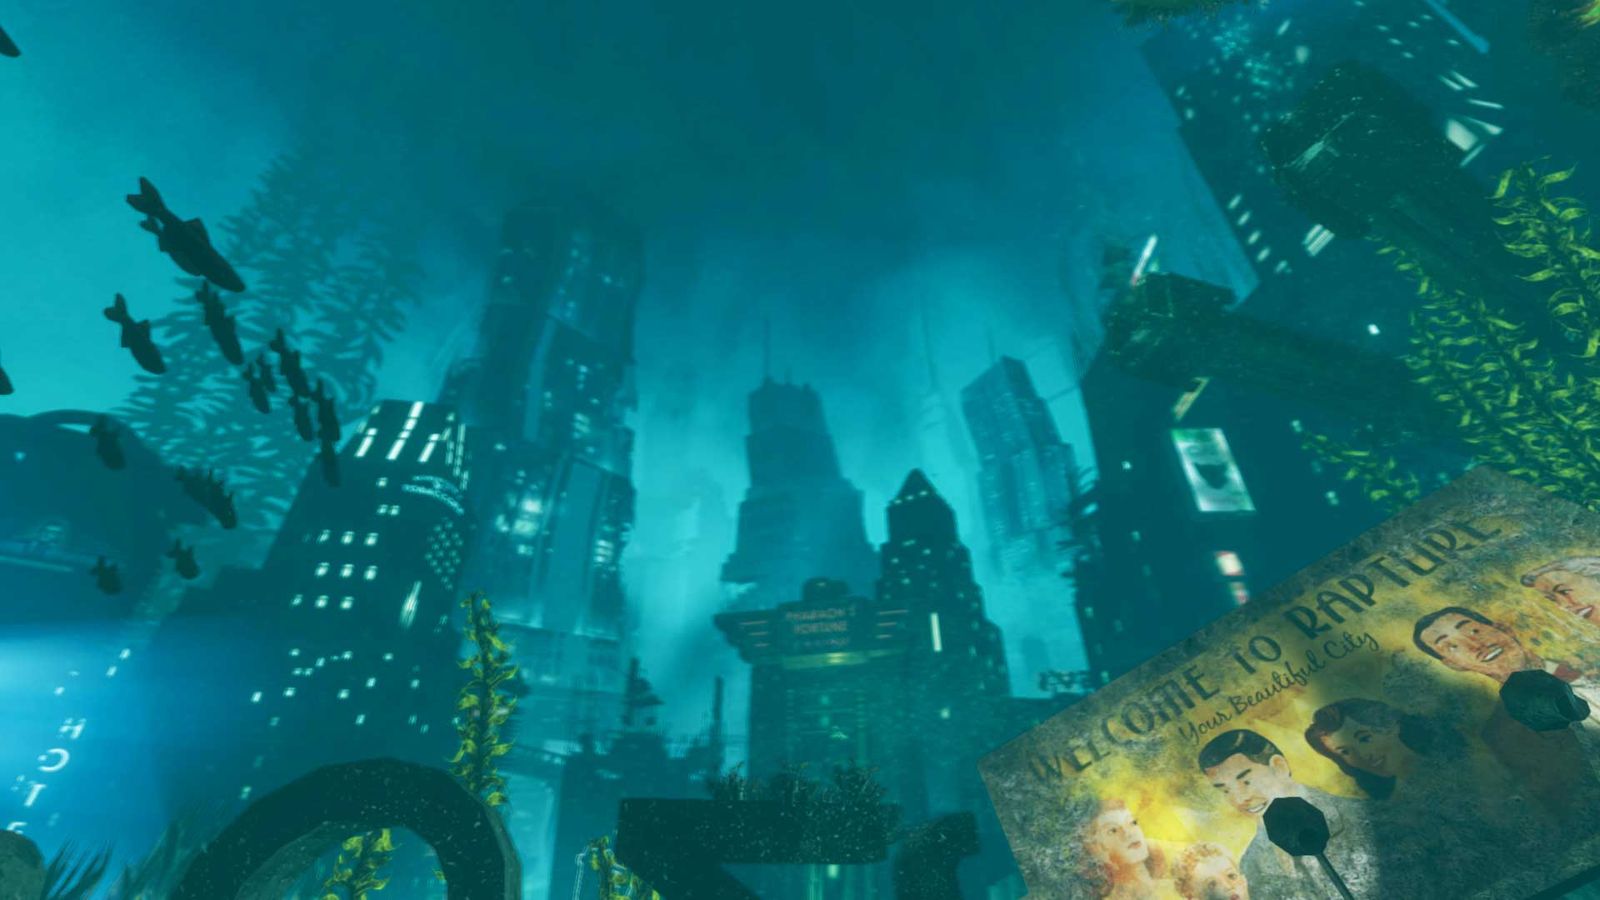 An image of Rapture from Bioshock, in at number 3 in the Top 10 worst video game cities to live in.